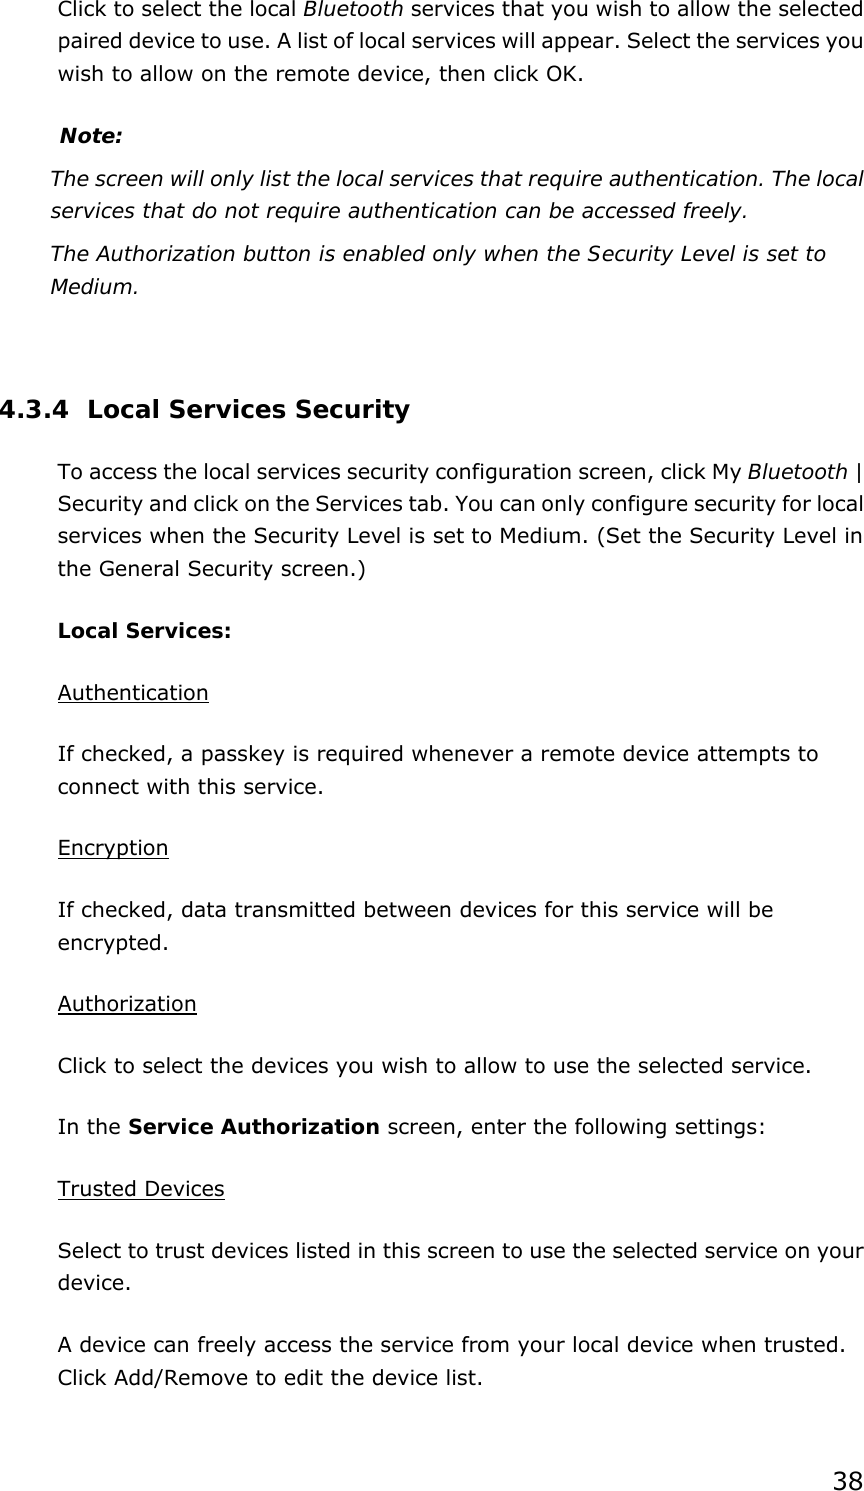 38 Click to select the local Bluetooth services that you wish to allow the selected   paired device to use. A list of local services will appear. Select the services you wish to allow on the remote device, then click OK. Note: The screen will only list the local services that require authentication. The local services that do not require authentication can be accessed freely. The Authorization button is enabled only when the Security Level is set to Medium.    4.3.4 Local Services Security To access the local services security configuration screen, click My Bluetooth | Security and click on the Services tab. You can only configure security for local services when the Security Level is set to Medium. (Set the Security Level in the General Security screen.) Local Services: Authentication If checked, a passkey is required whenever a remote device attempts to connect with this service. Encryption If checked, data transmitted between devices for this service will be encrypted. Authorization Click to select the devices you wish to allow to use the selected service. In the Service Authorization screen, enter the following settings: Trusted Devices Select to trust devices listed in this screen to use the selected service on your device. A device can freely access the service from your local device when trusted. Click Add/Remove to edit the device list. 